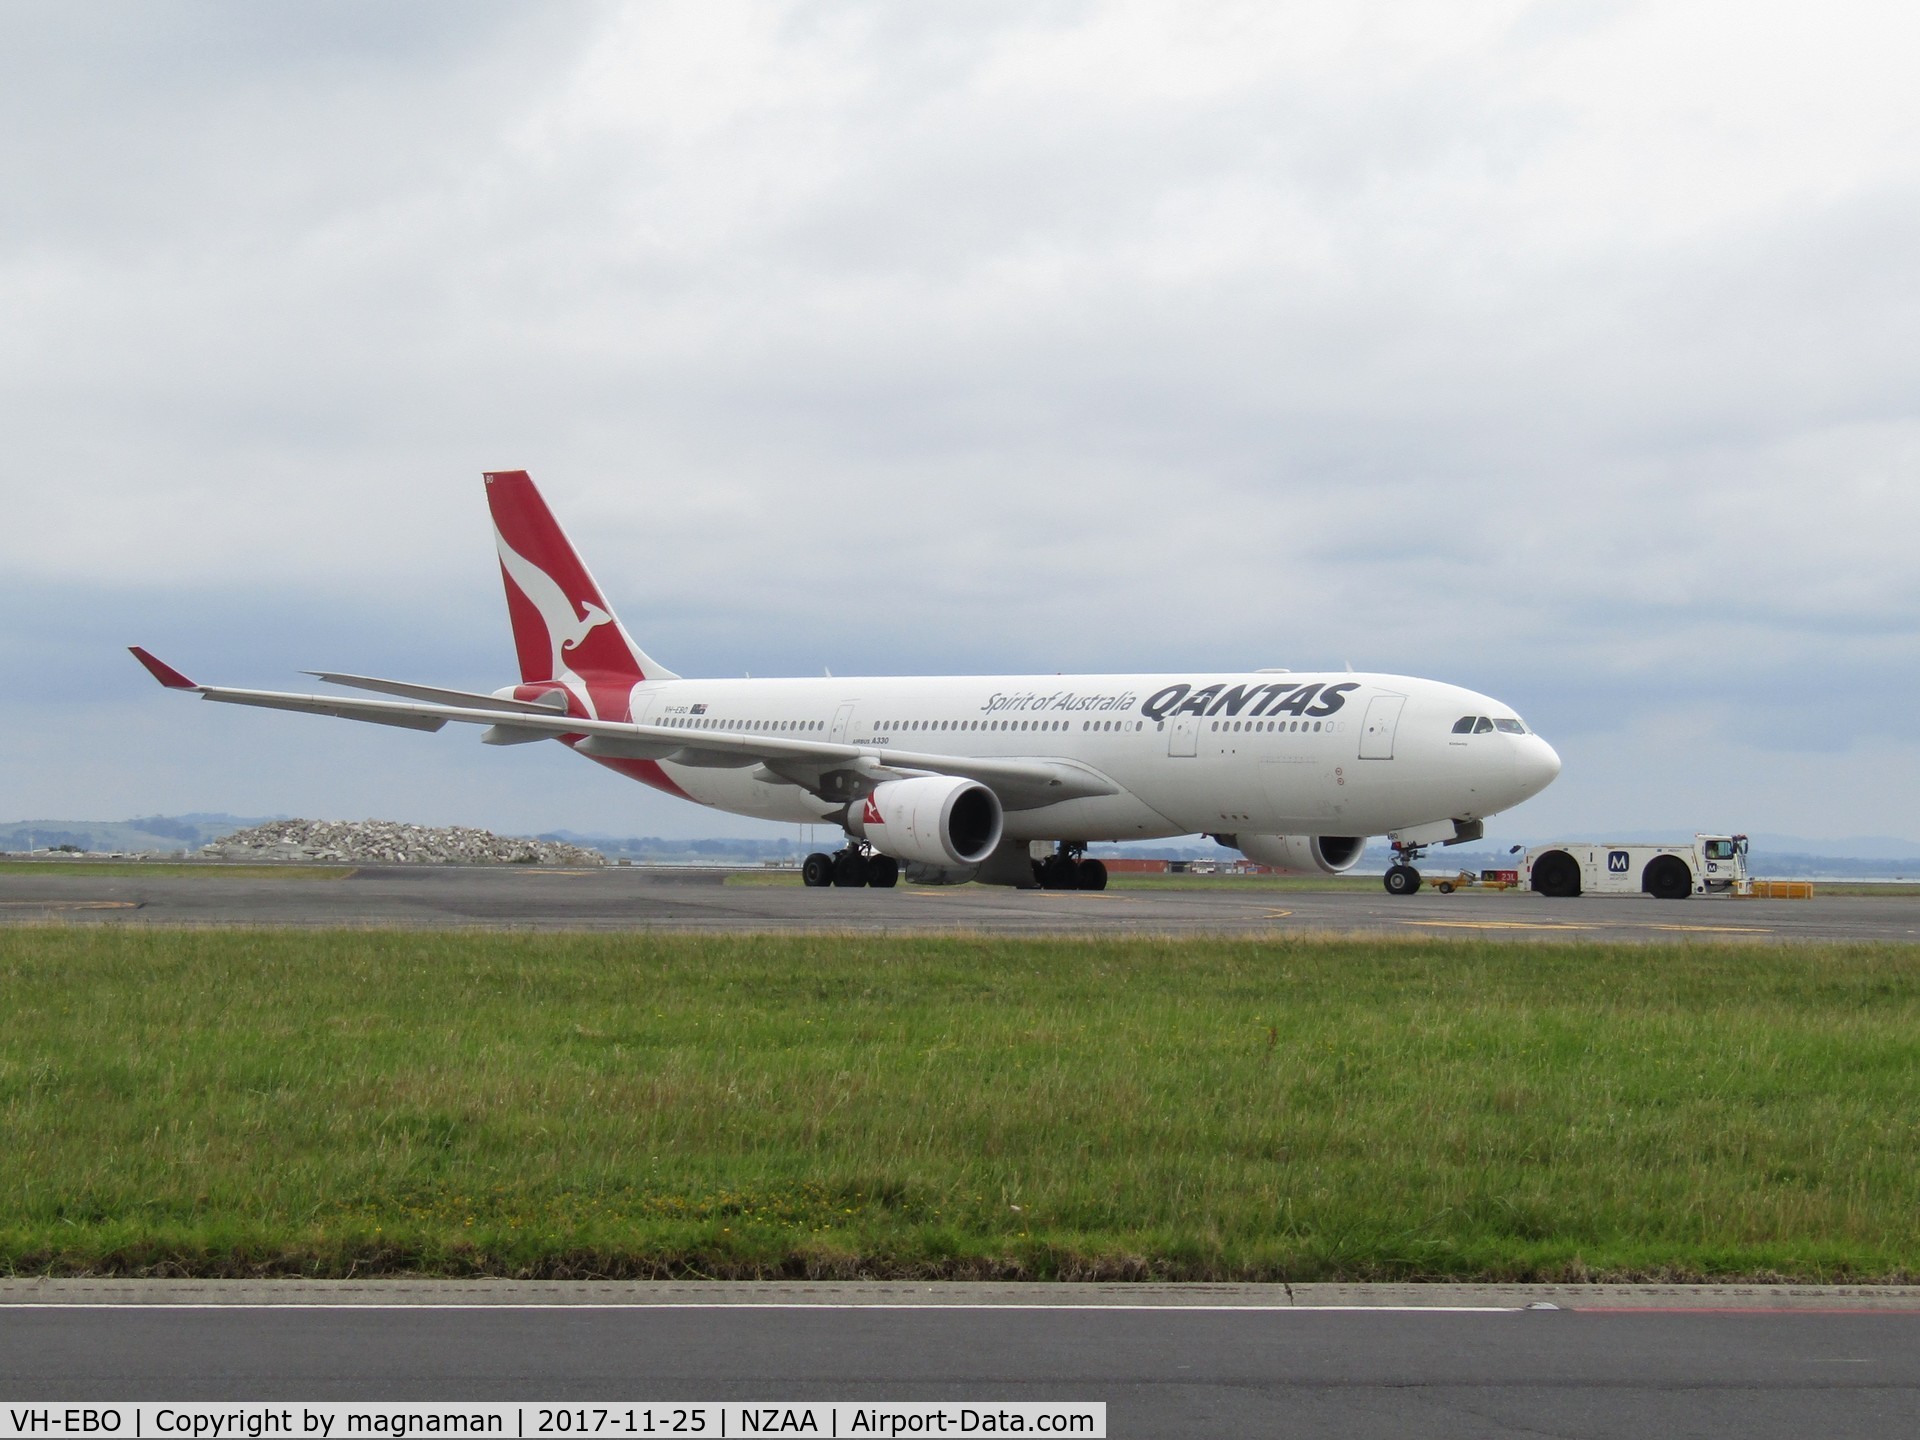 VH-EBO, 2010 Airbus A330-202 C/N 1169, towed off to stand after hydraulic issues